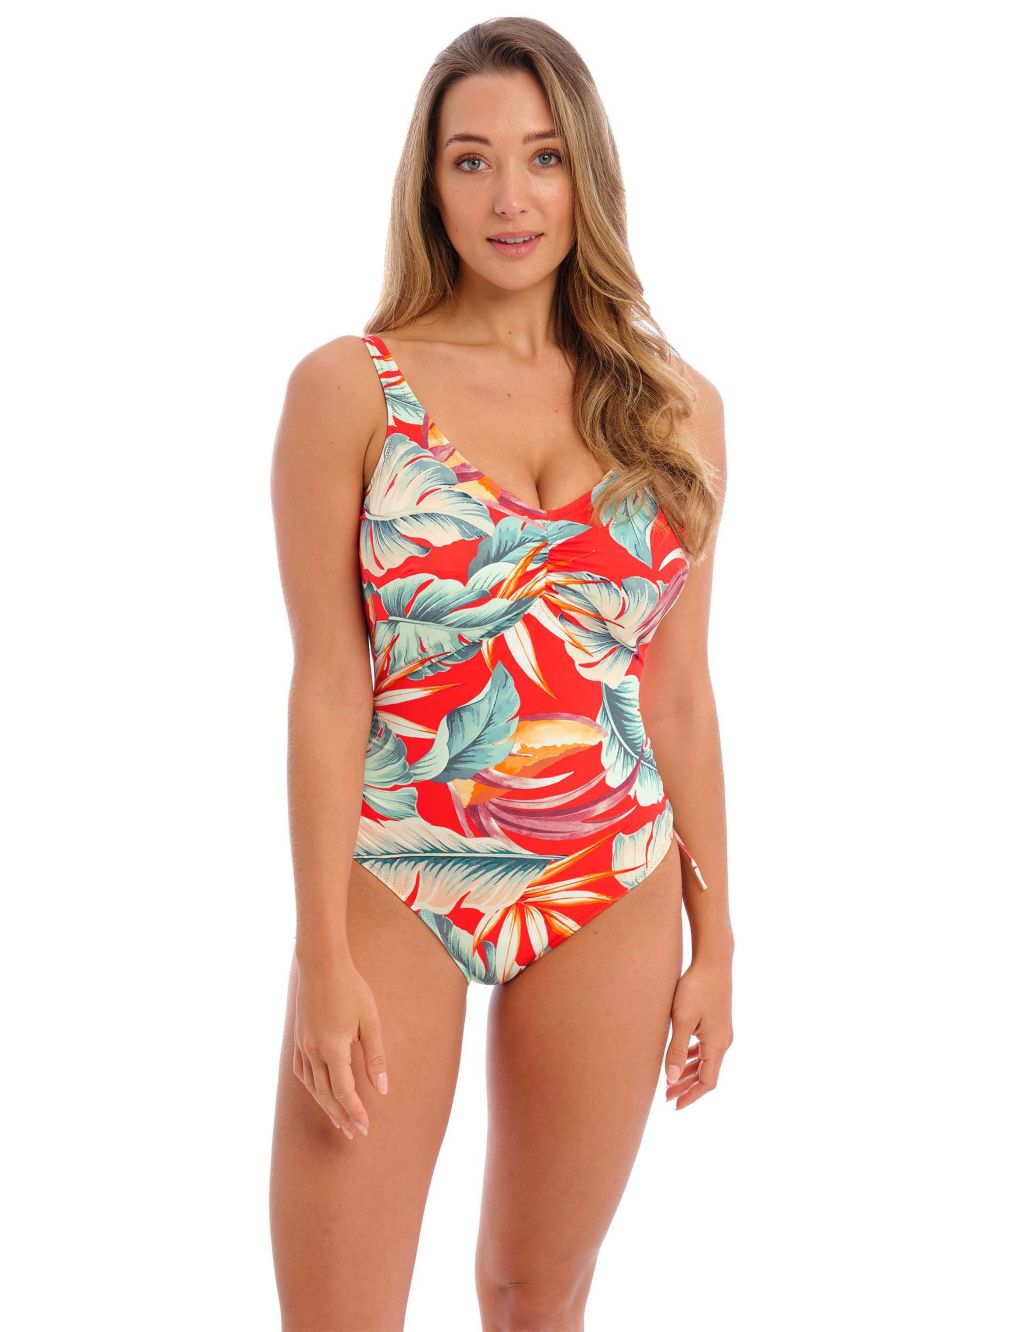 Bamboo Grove Wired V-Neck Swimsuit image 1